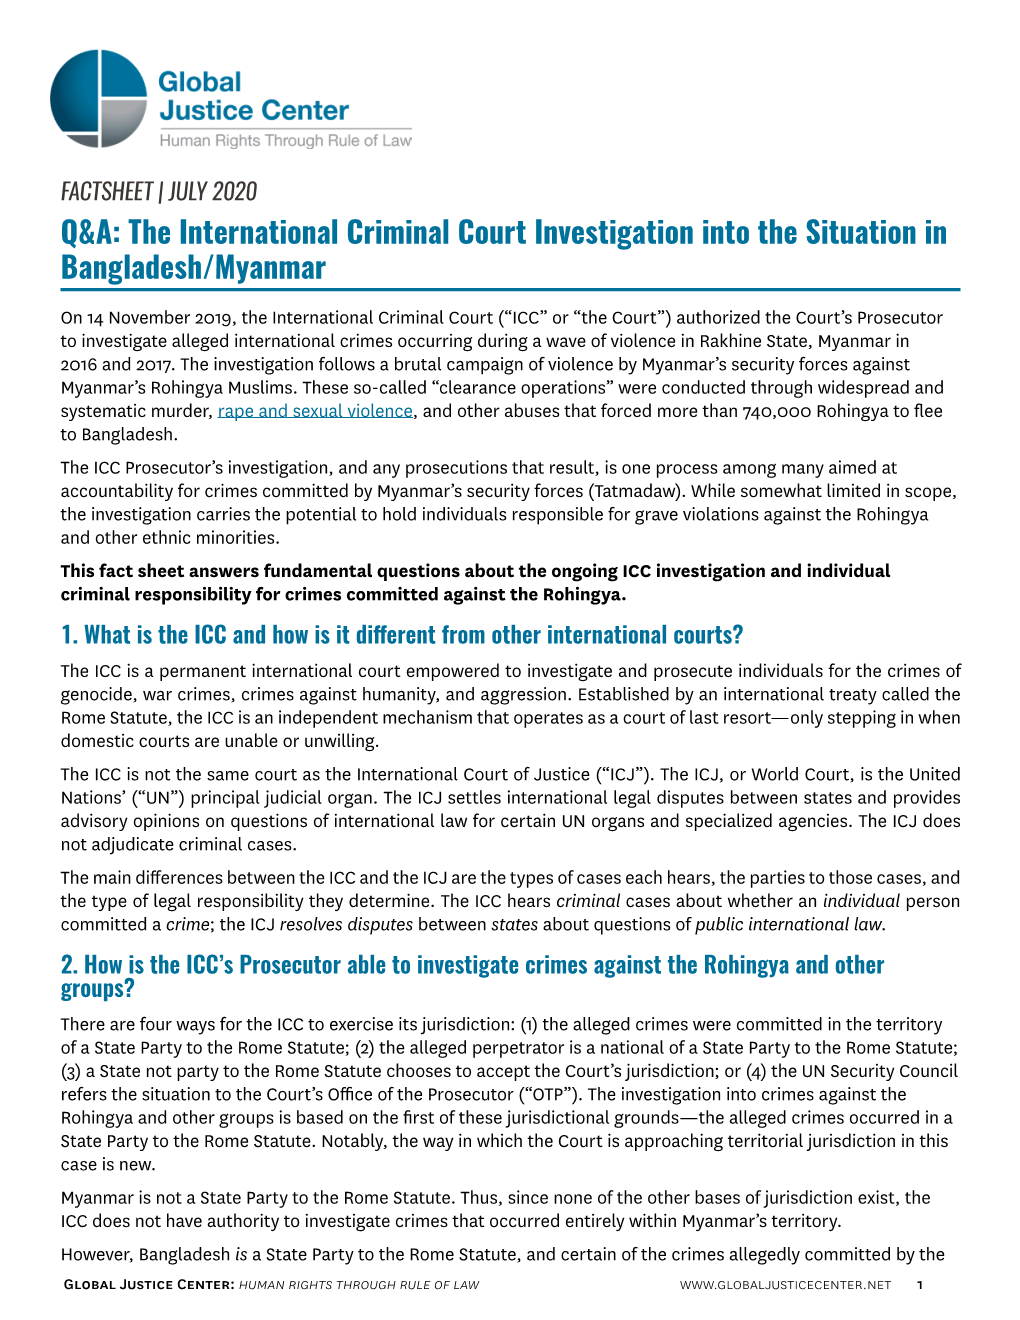 Q&A: the International Criminal Court Investigation Into the Situation In